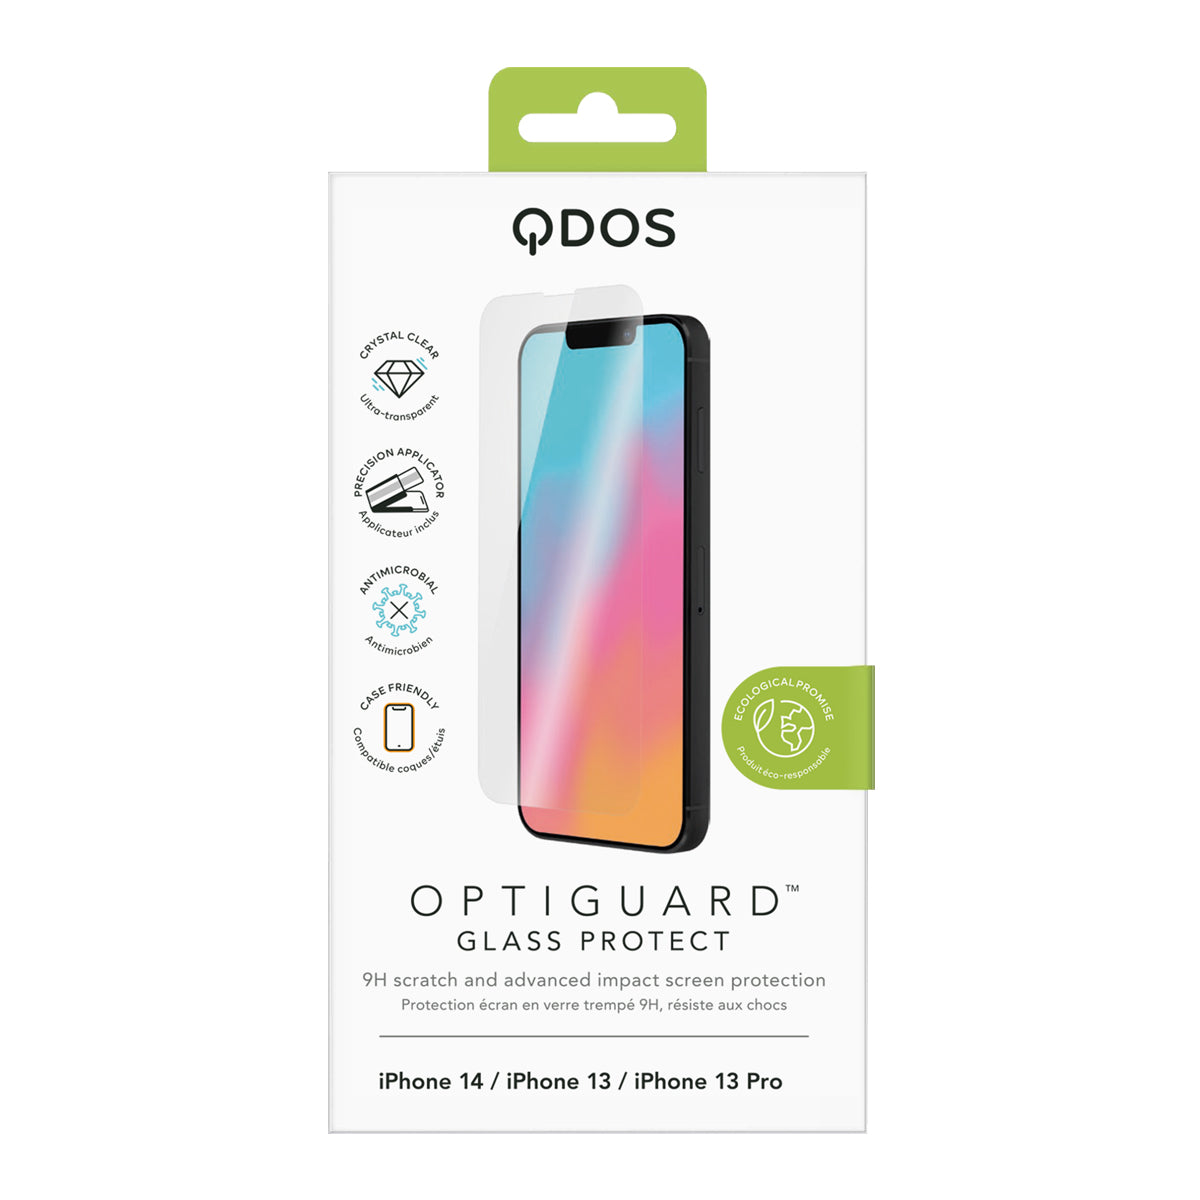 OptiGuard Glass Protect for Phone 14 / iPhone 13 / iPhone 13 Pro